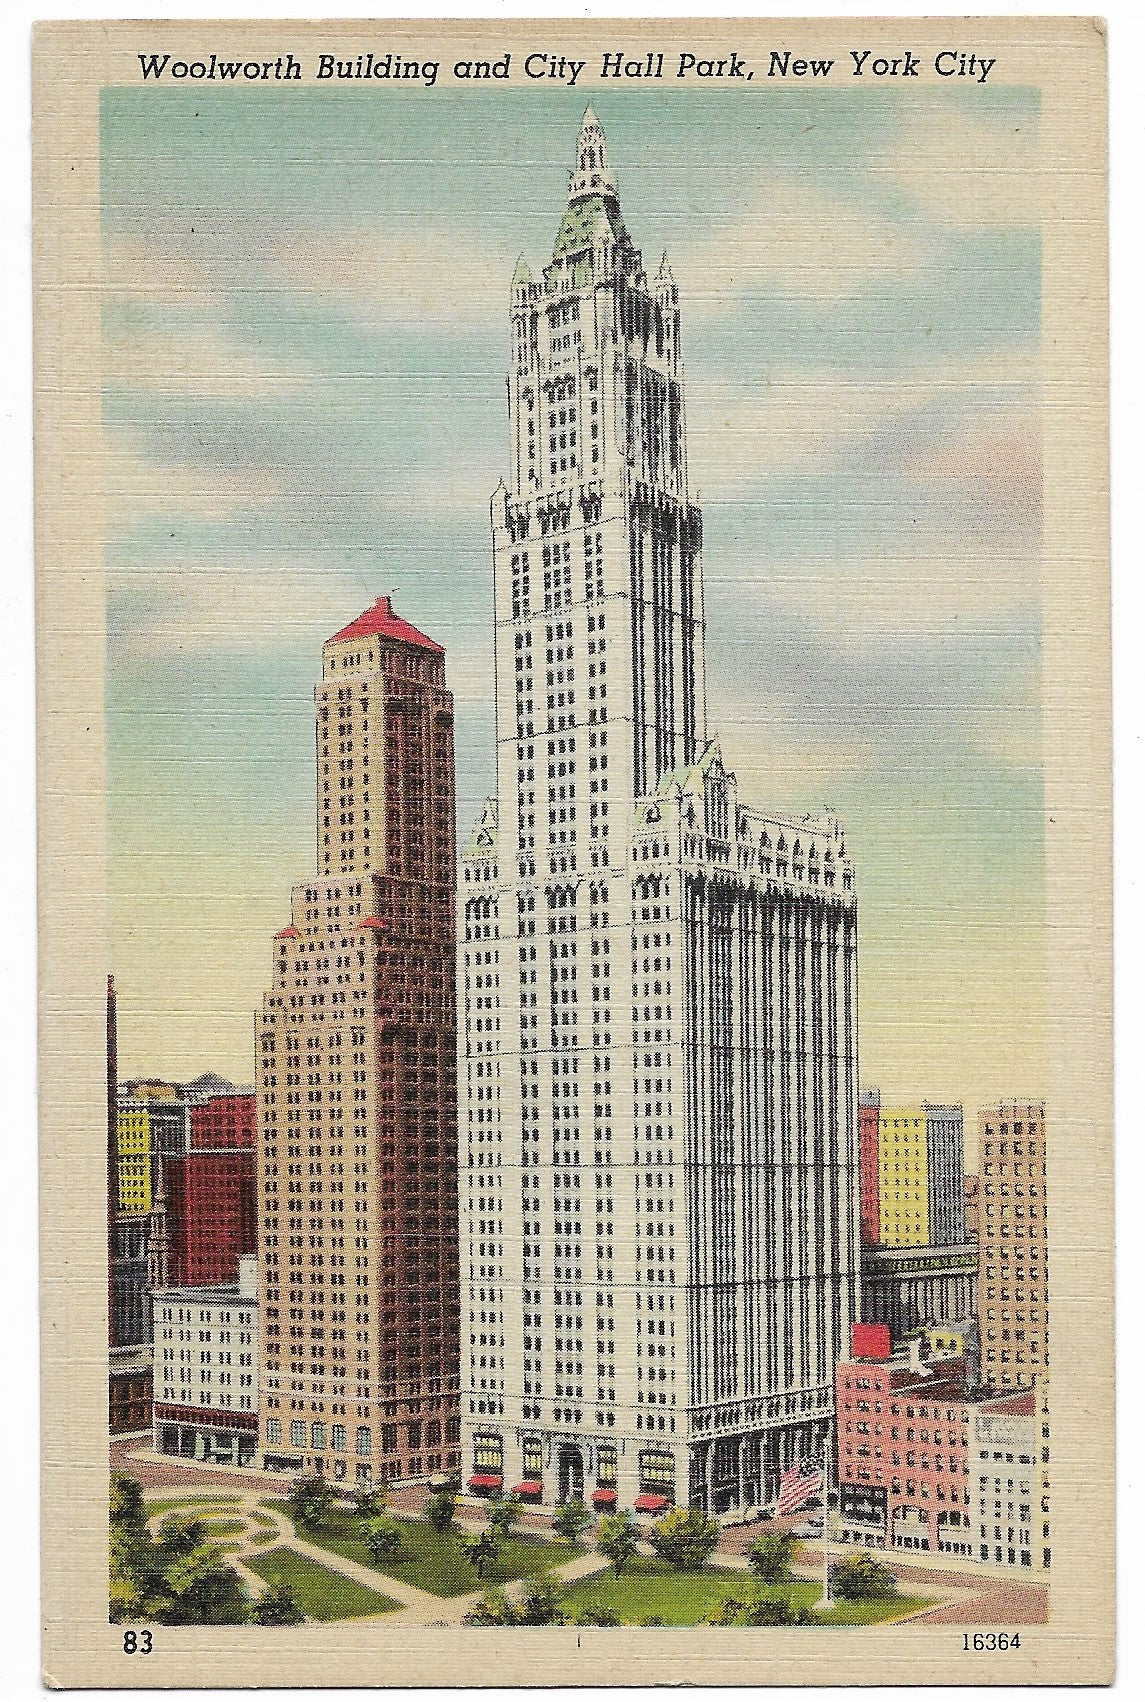 Woolworth Building and City Hall Park, New York City Vintage Postcard